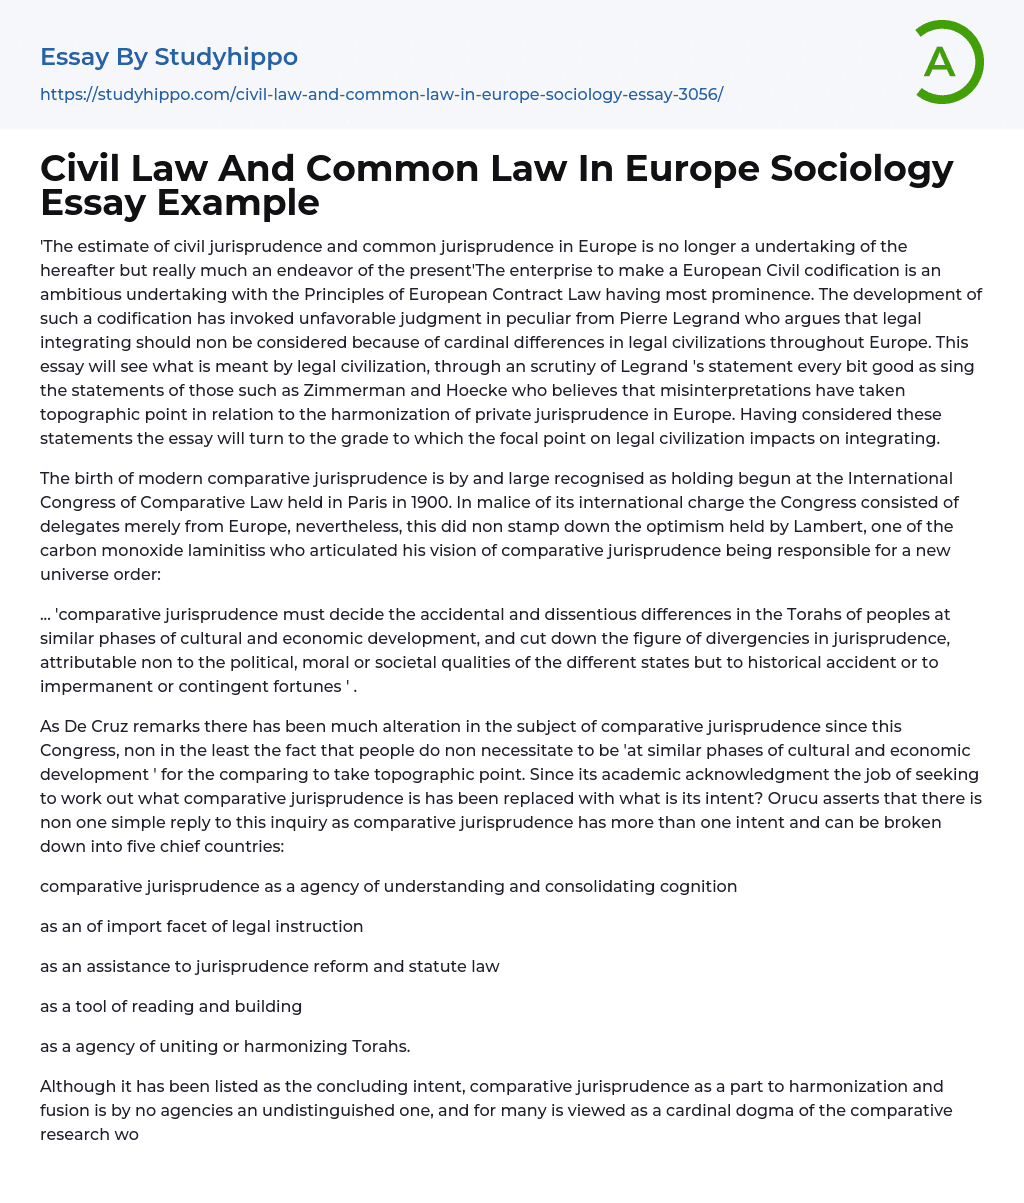 Civil Law And Common Law In Europe Sociology Essay Example